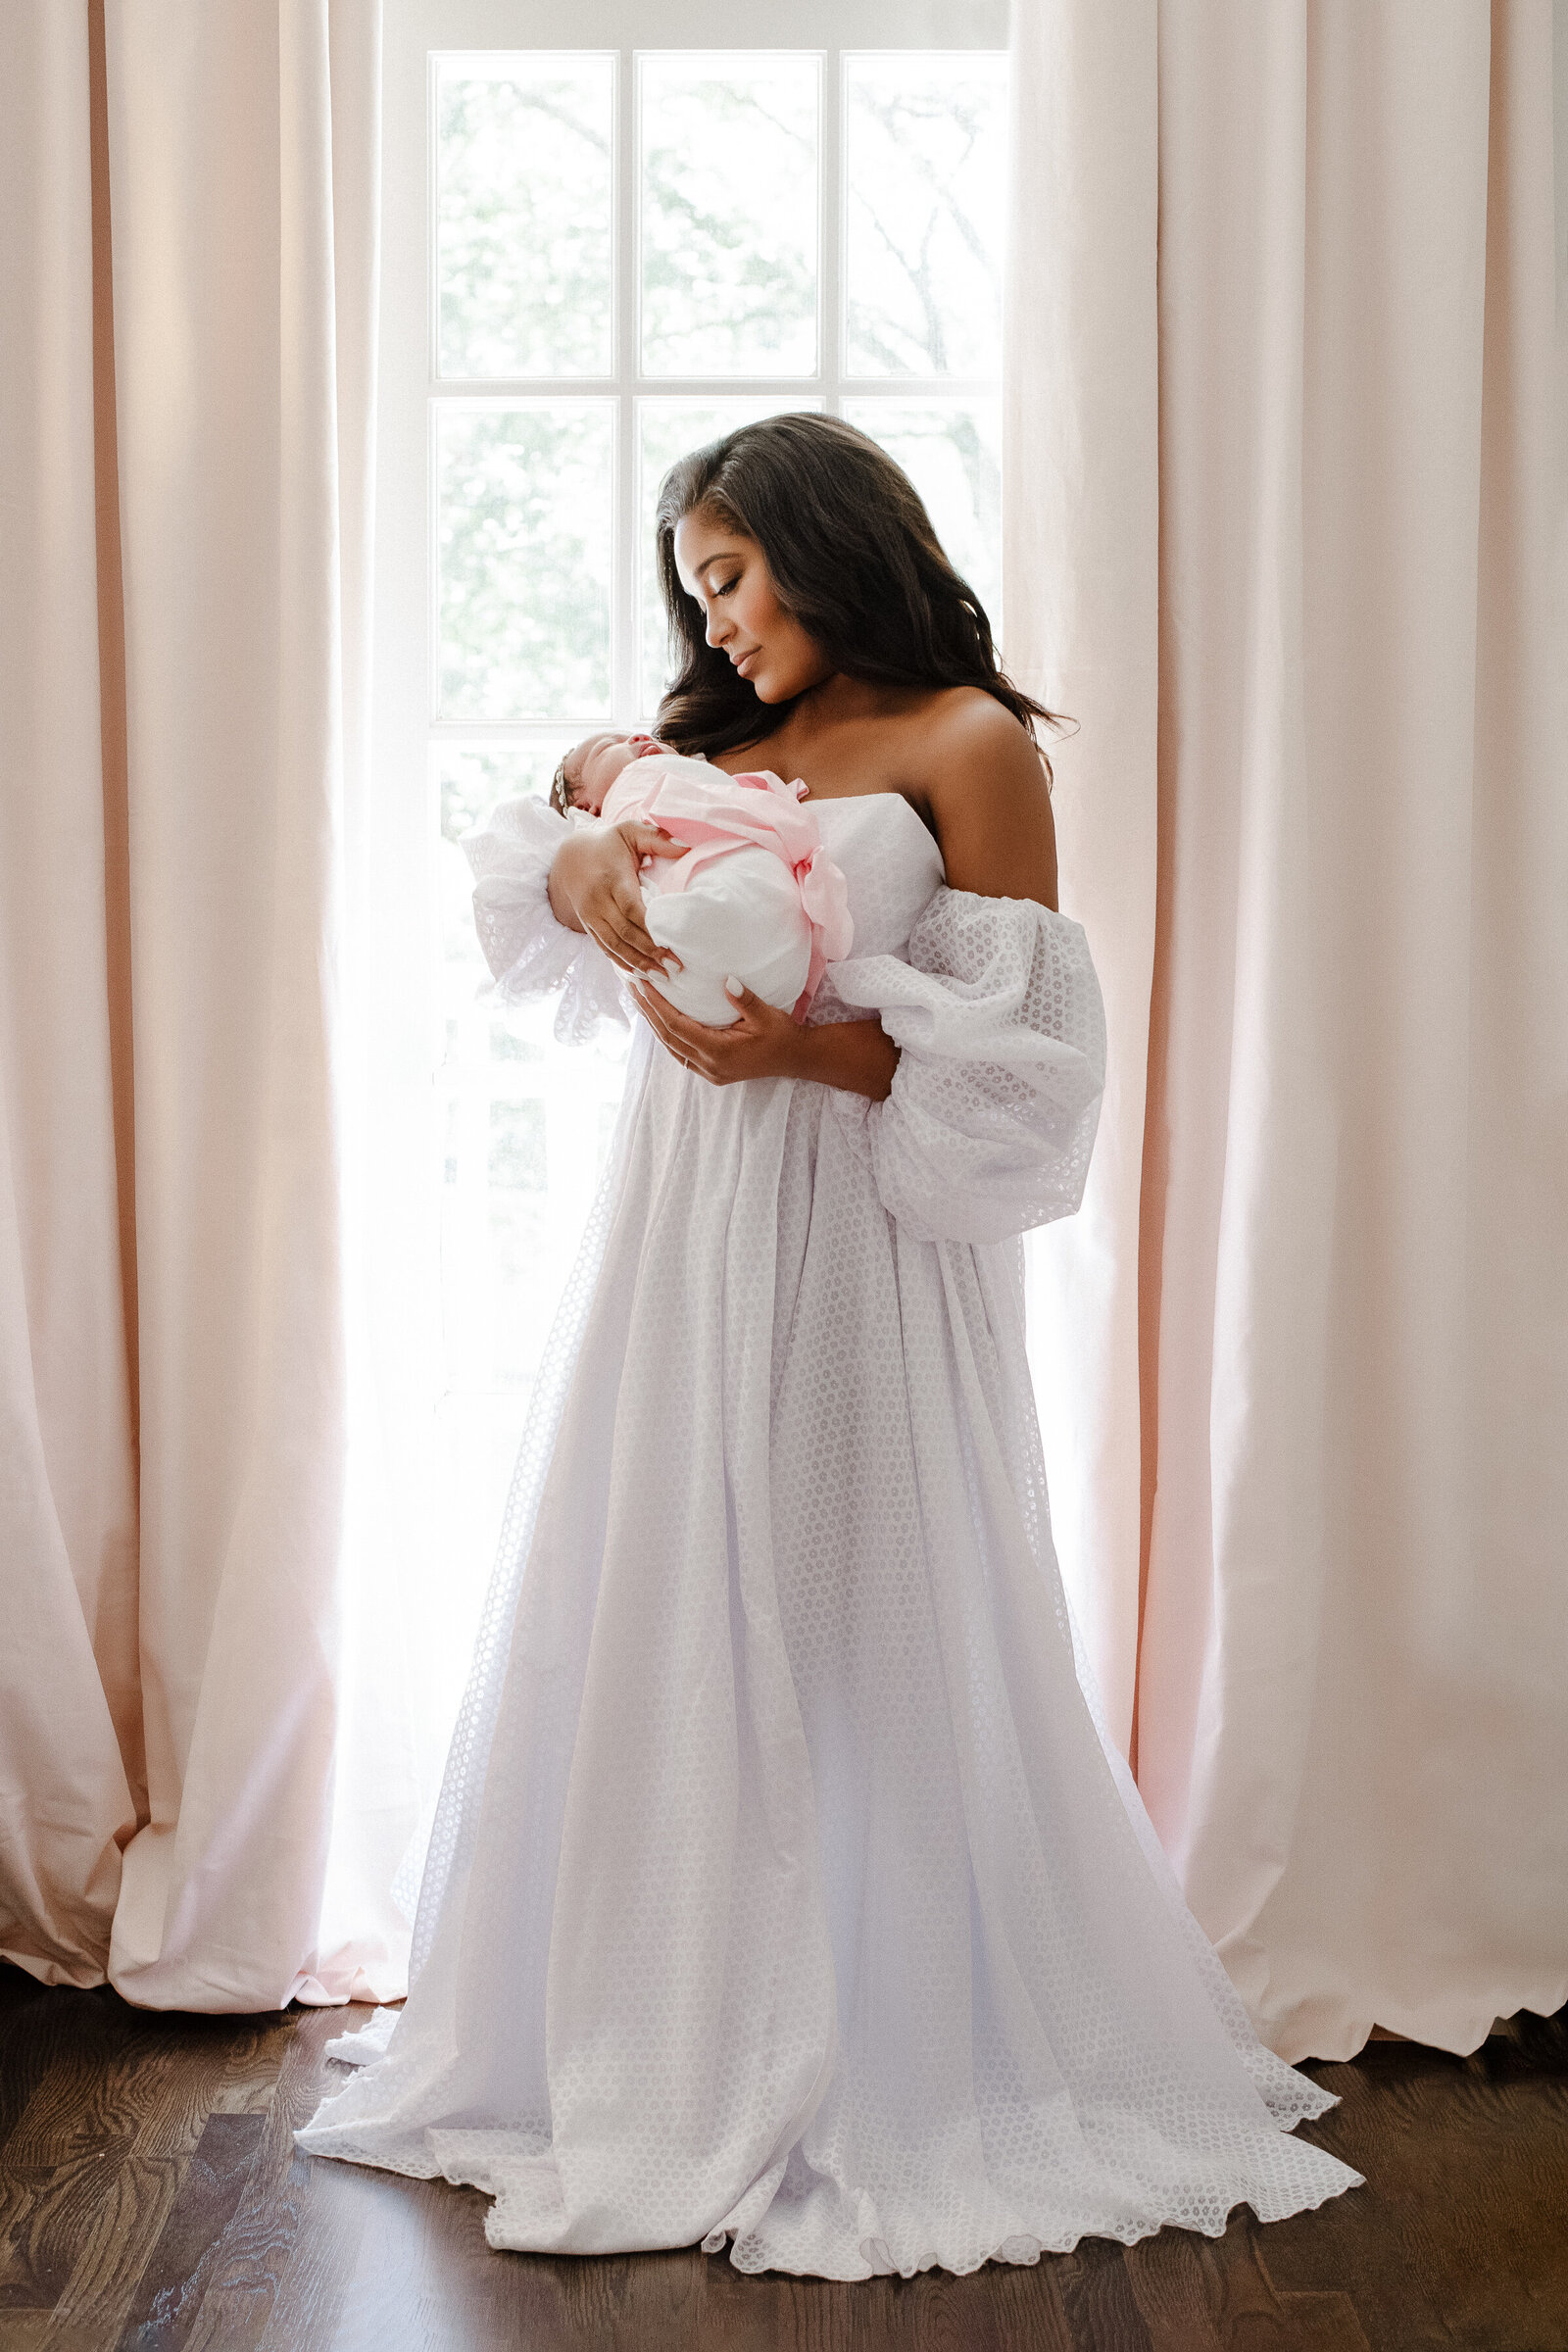 Melissa Lynne Couture Photography-Miami Newborn Photographer- Atlanta Newborn Photographer - Harper-17